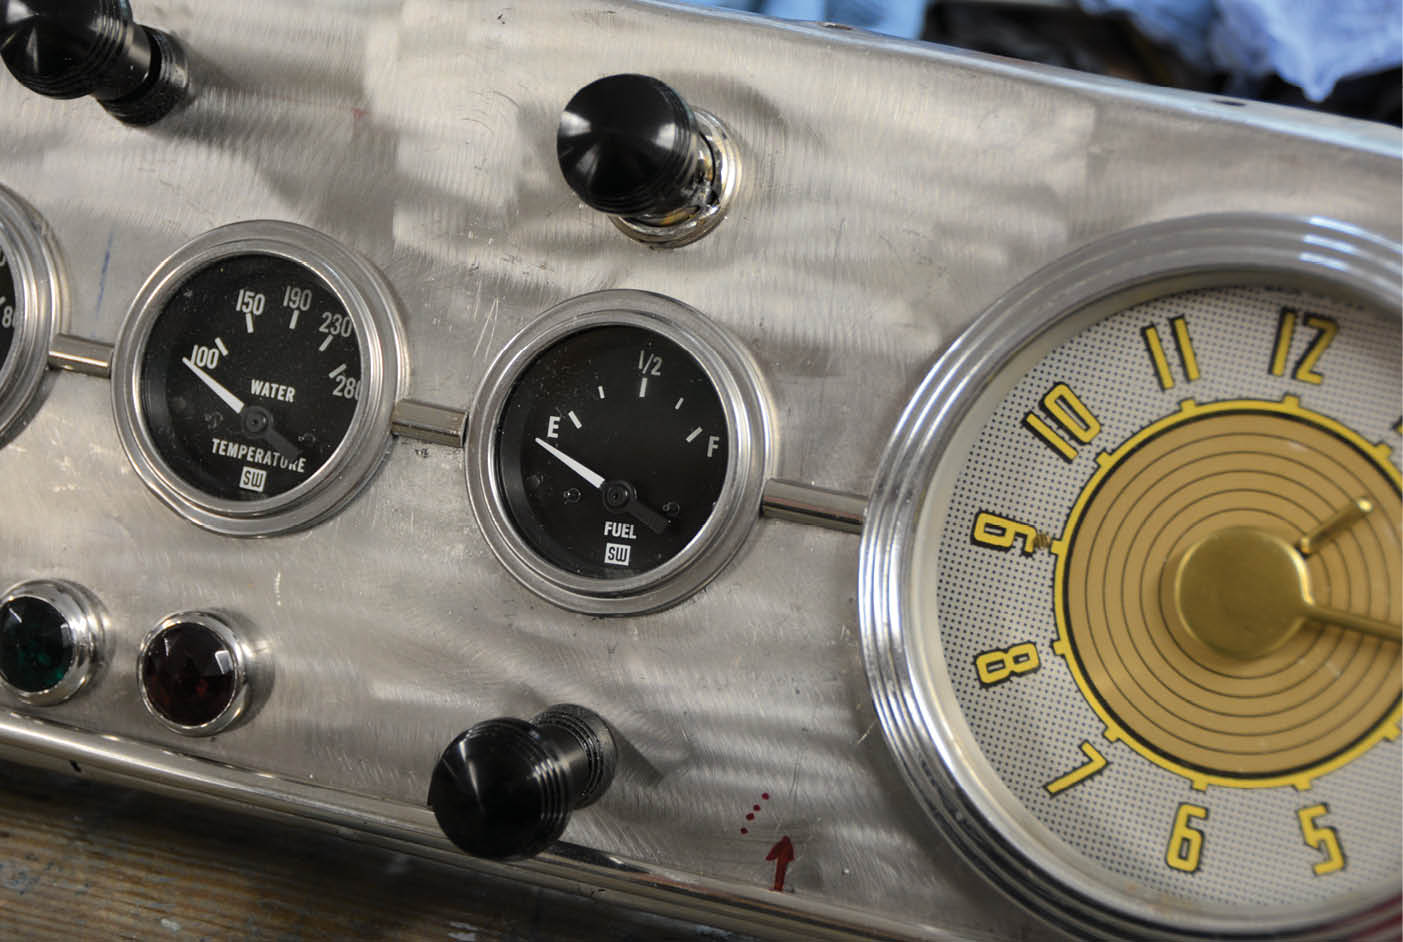 small pieces of trim between the gauges